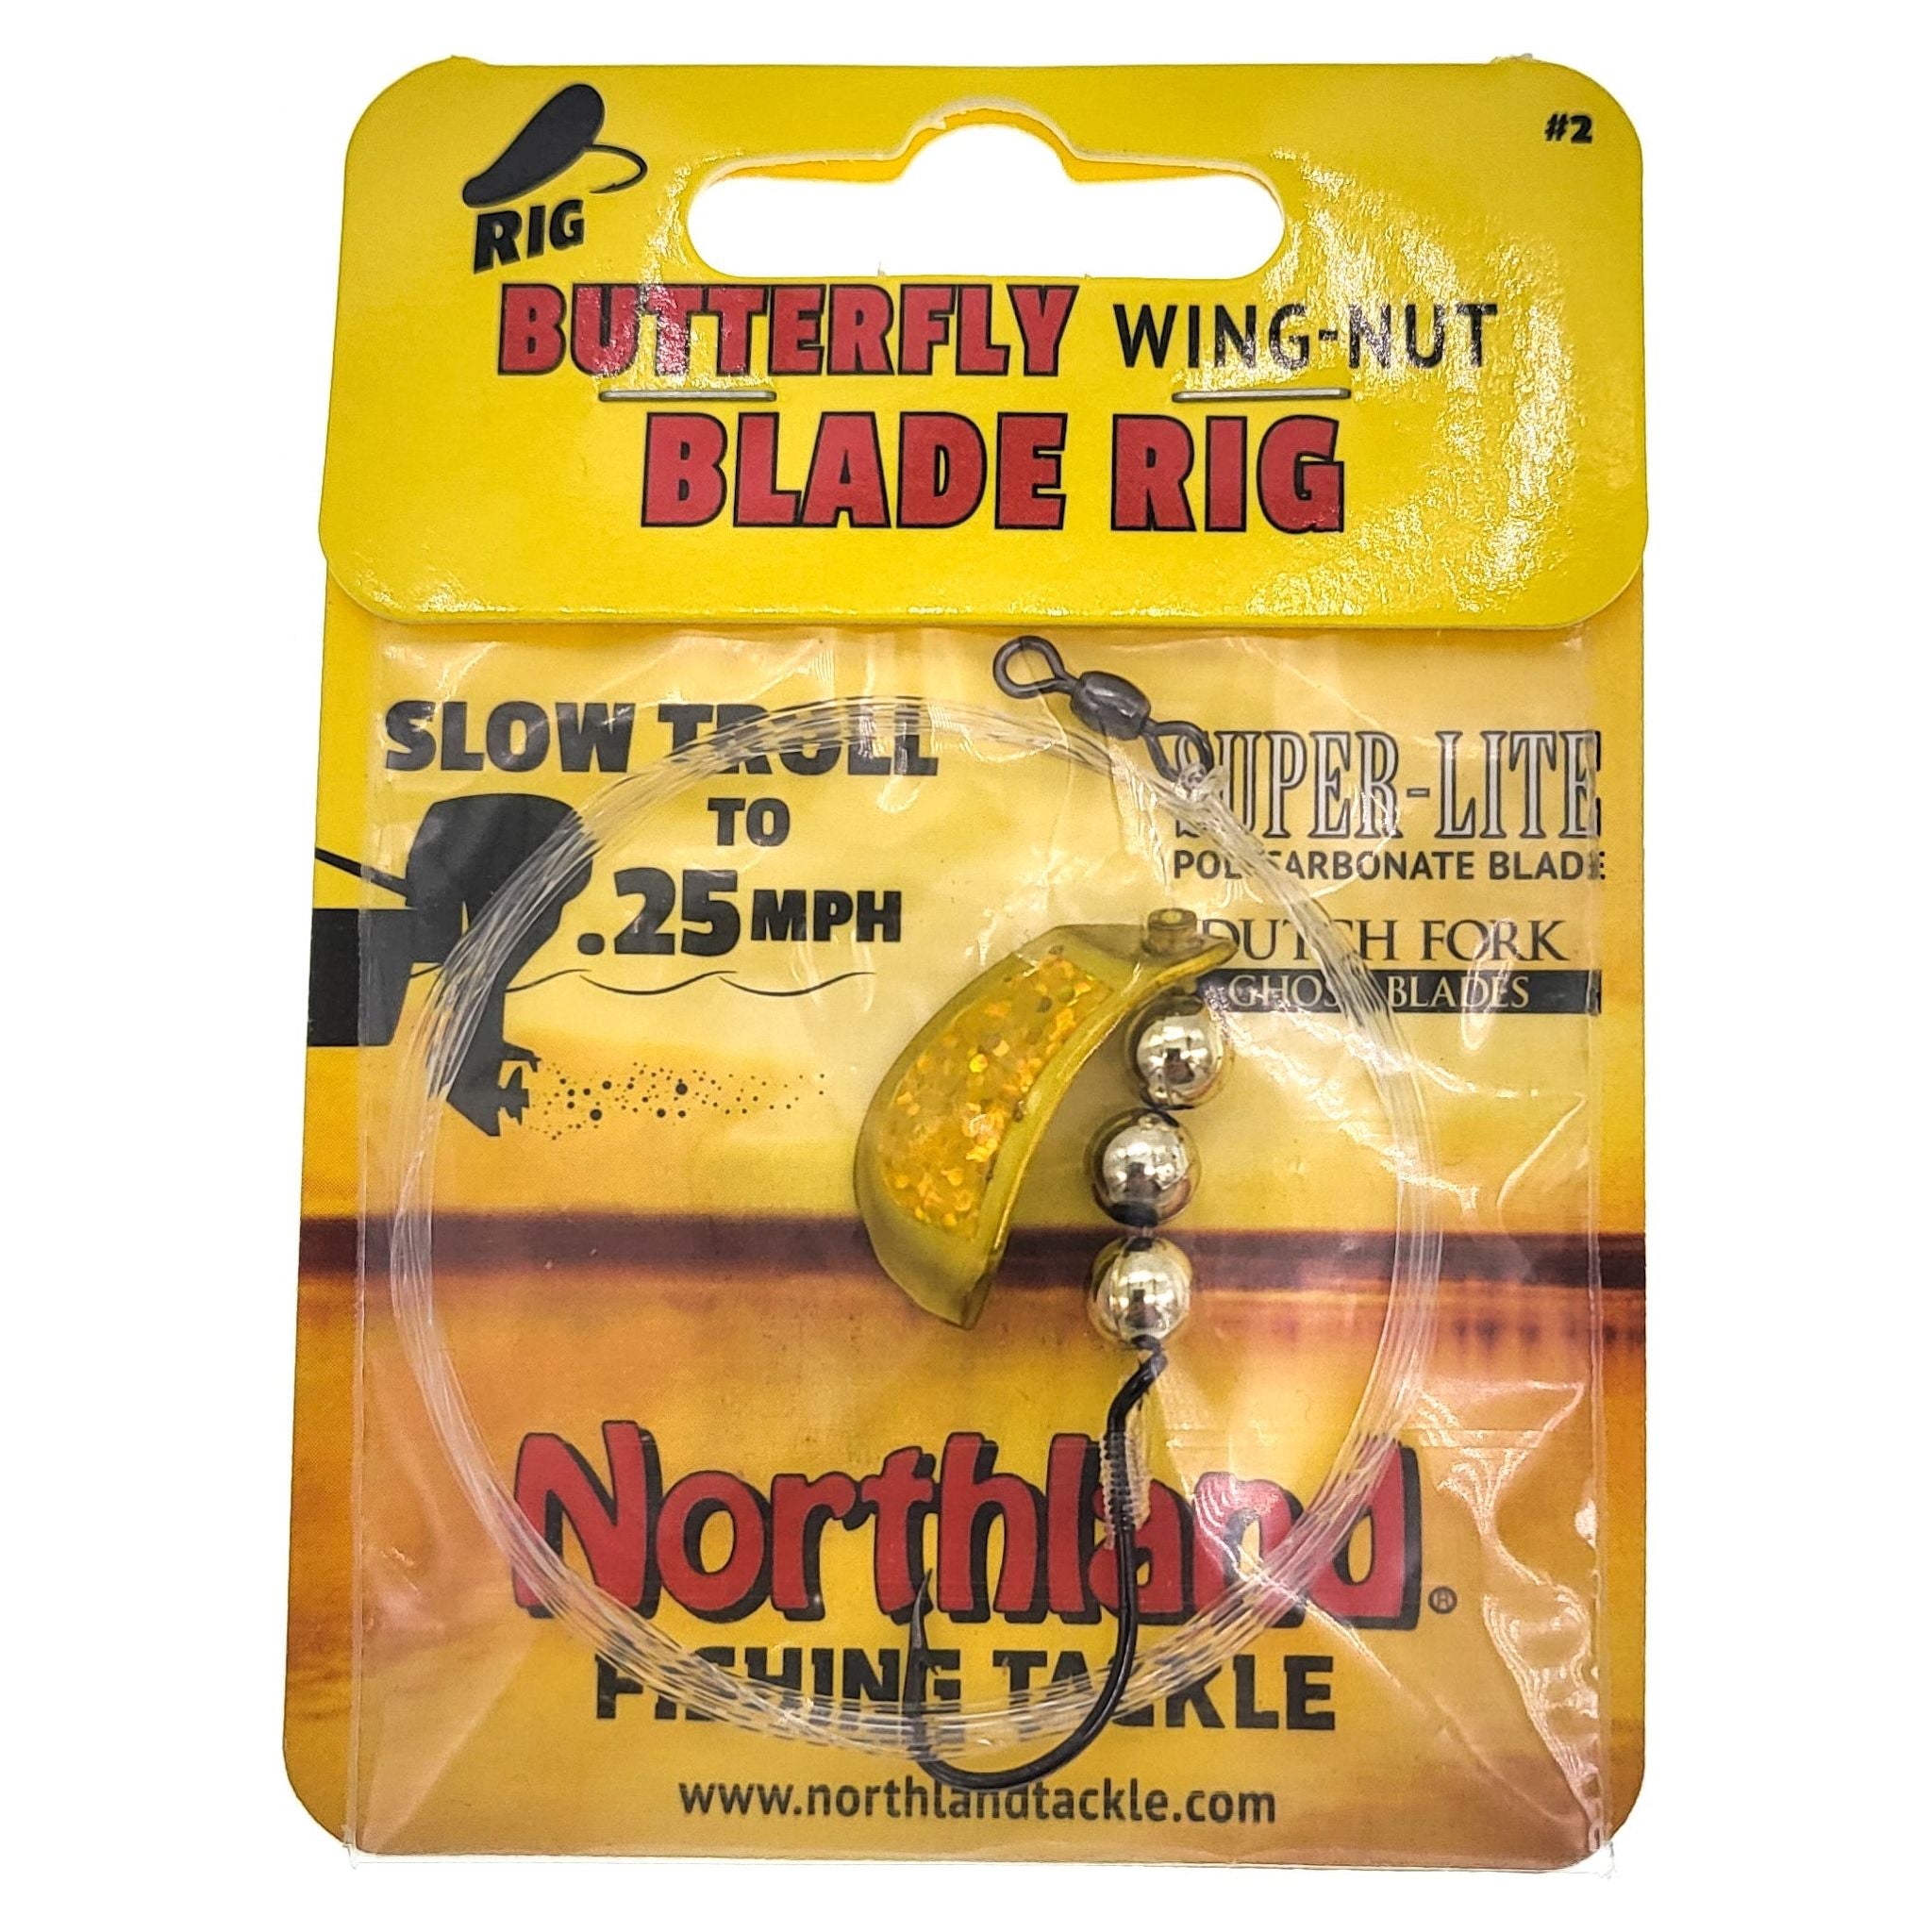 Northland Tackle Butterfly Wing Nut Blade Rig #2 Gold Shiner